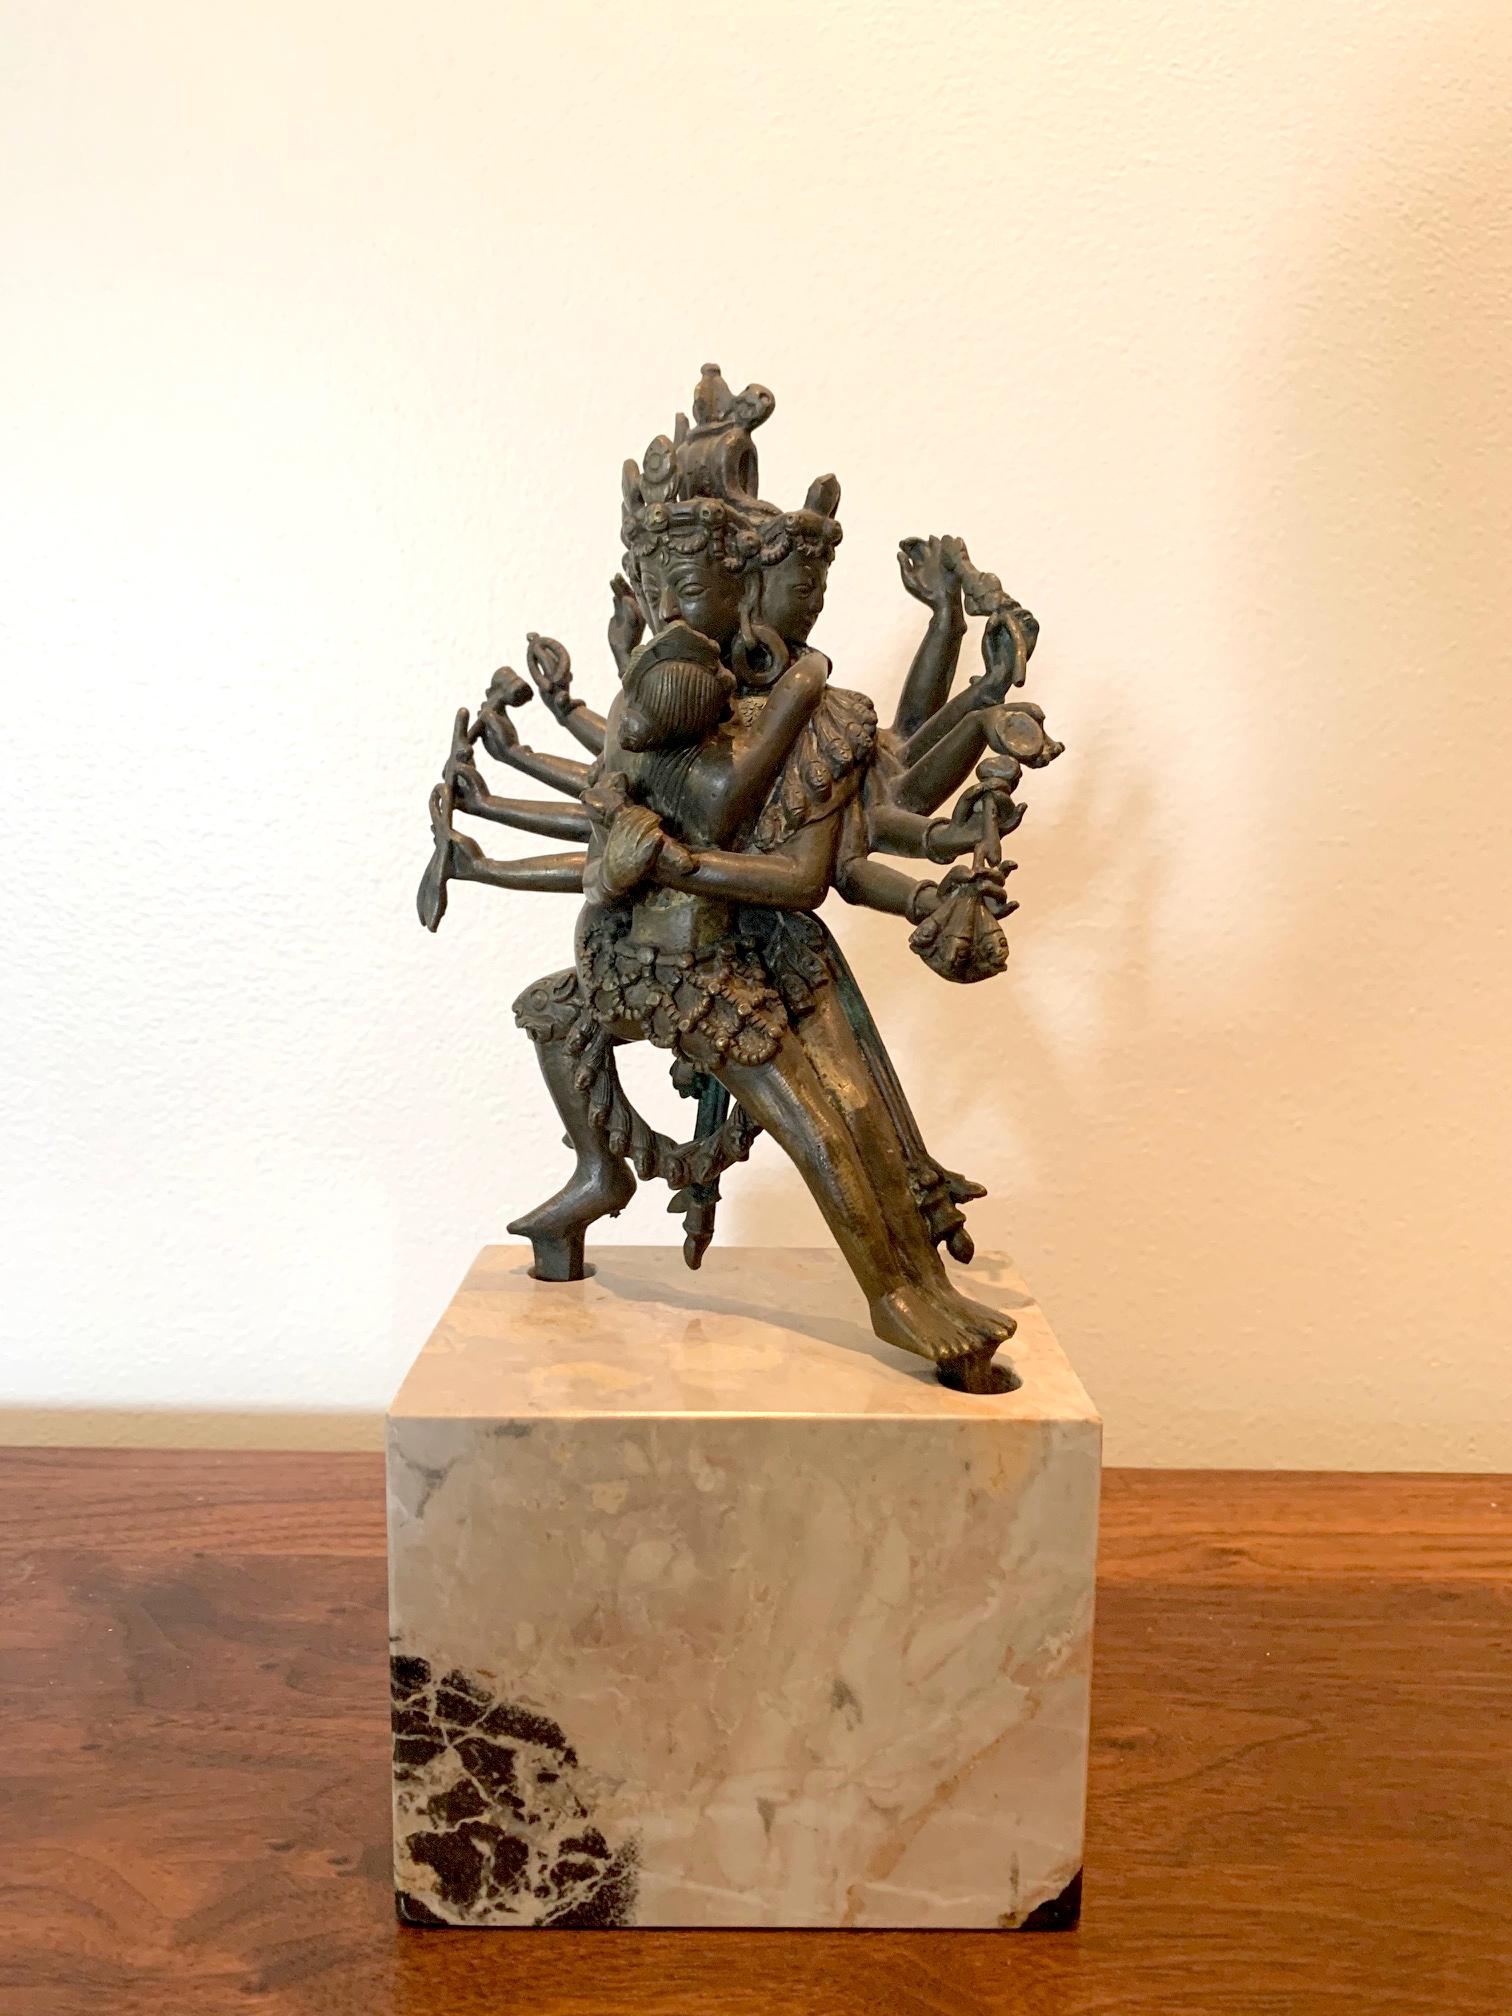 A small cast bronze statue of Yamantaka and his envisioned consort Vajravetali. It is the main fragment of a larger sectioned piece with the lotus base missing. A marble cube base was used to display the small statue. It is from Tibet, circa end